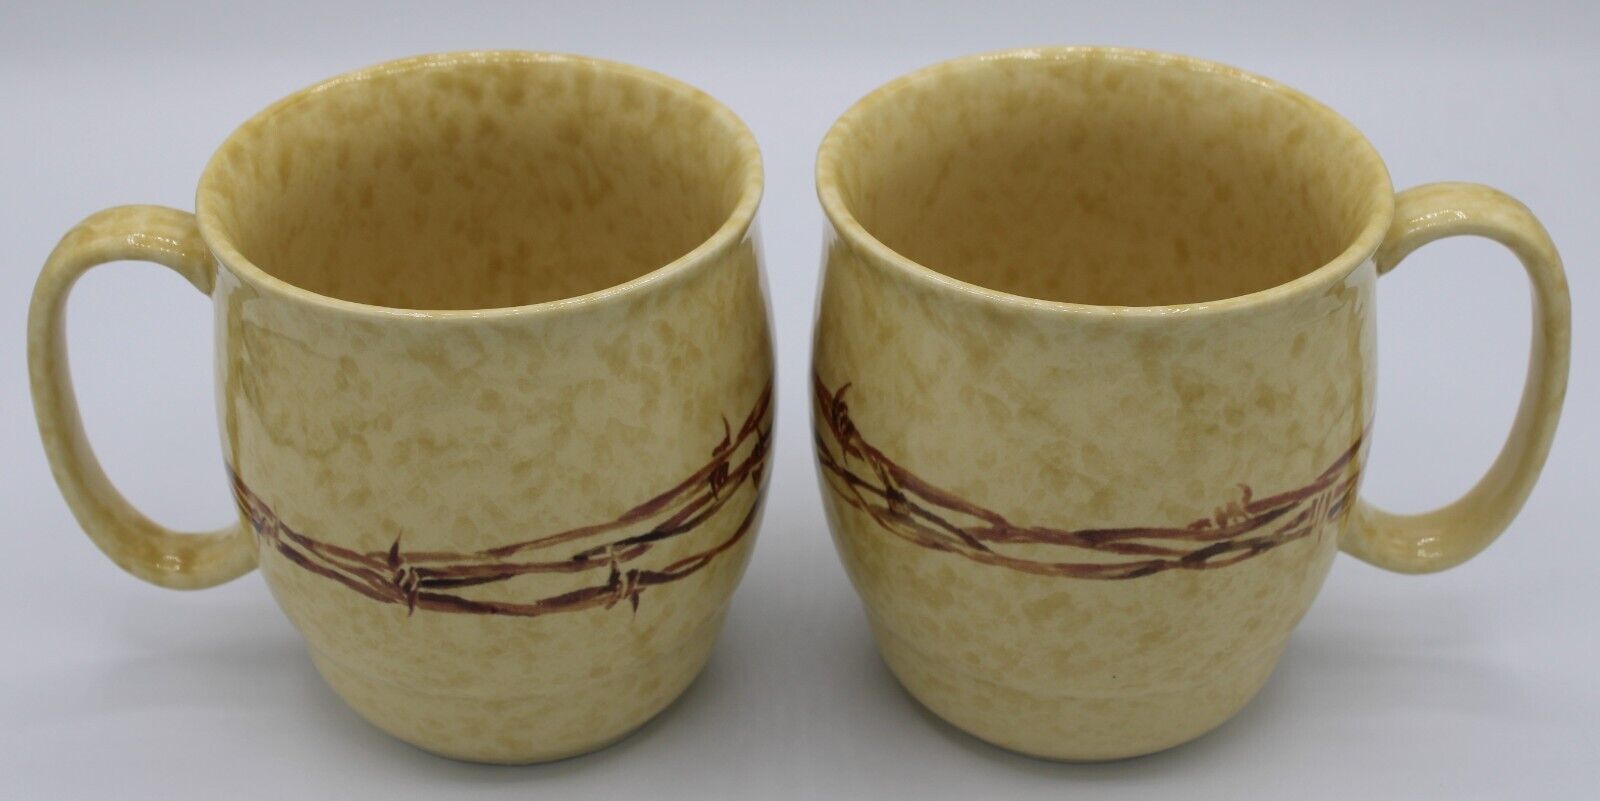 Eve Armson Cowboy Living Barbwire Collection Set of 2 Coffee Mugs/Cups